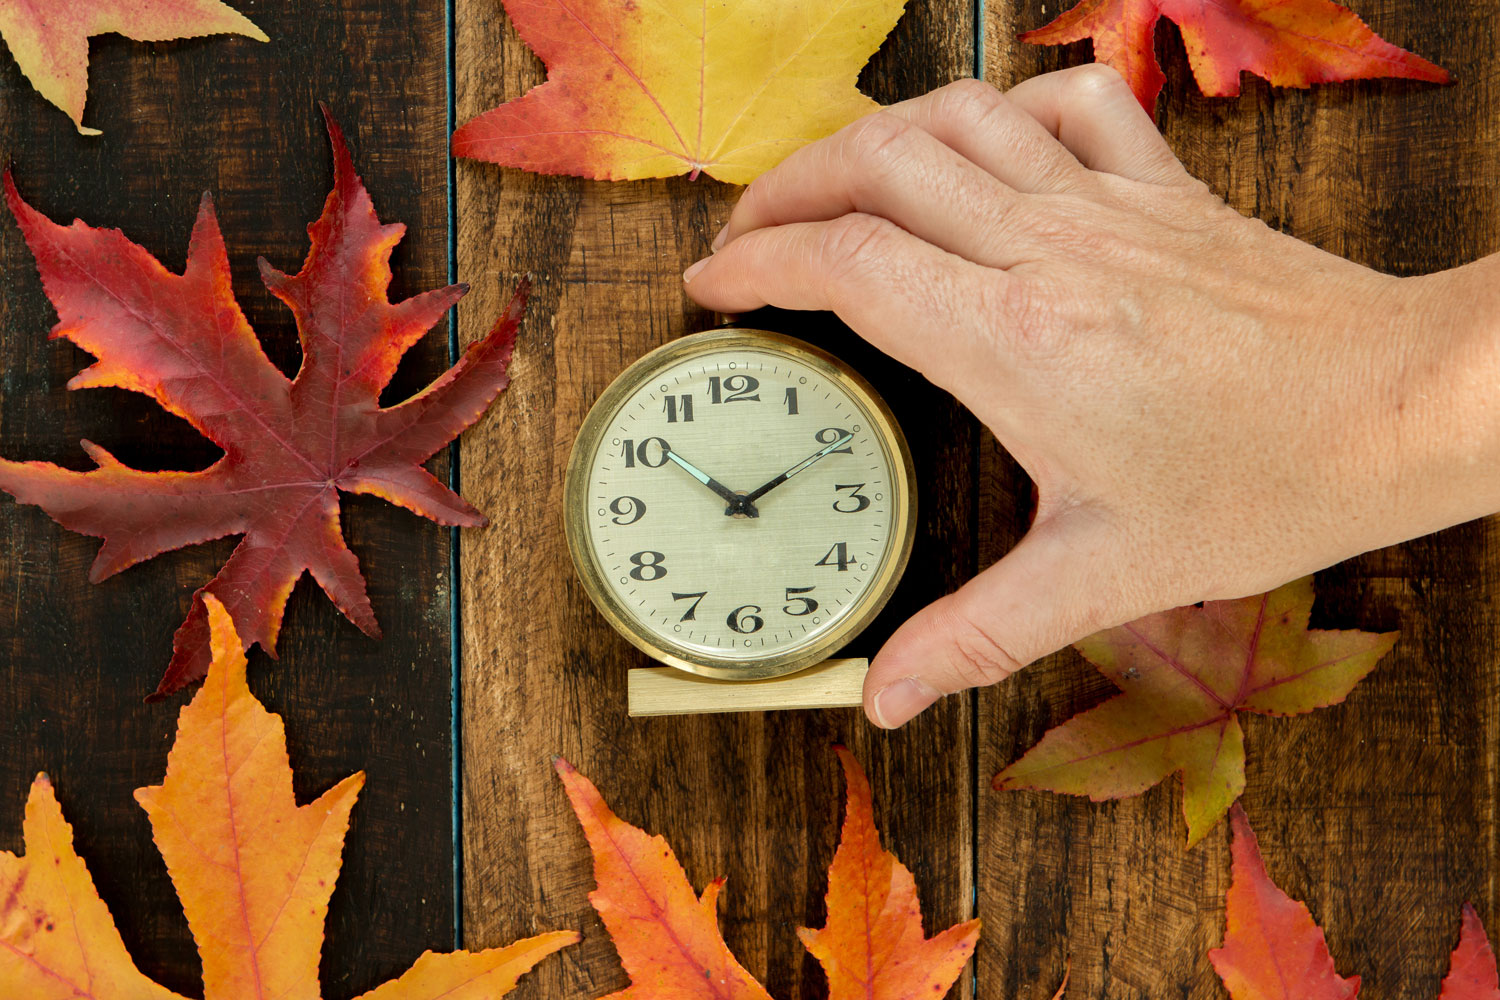 Seasonal Clock Changes Is It Time For Change In The UK?